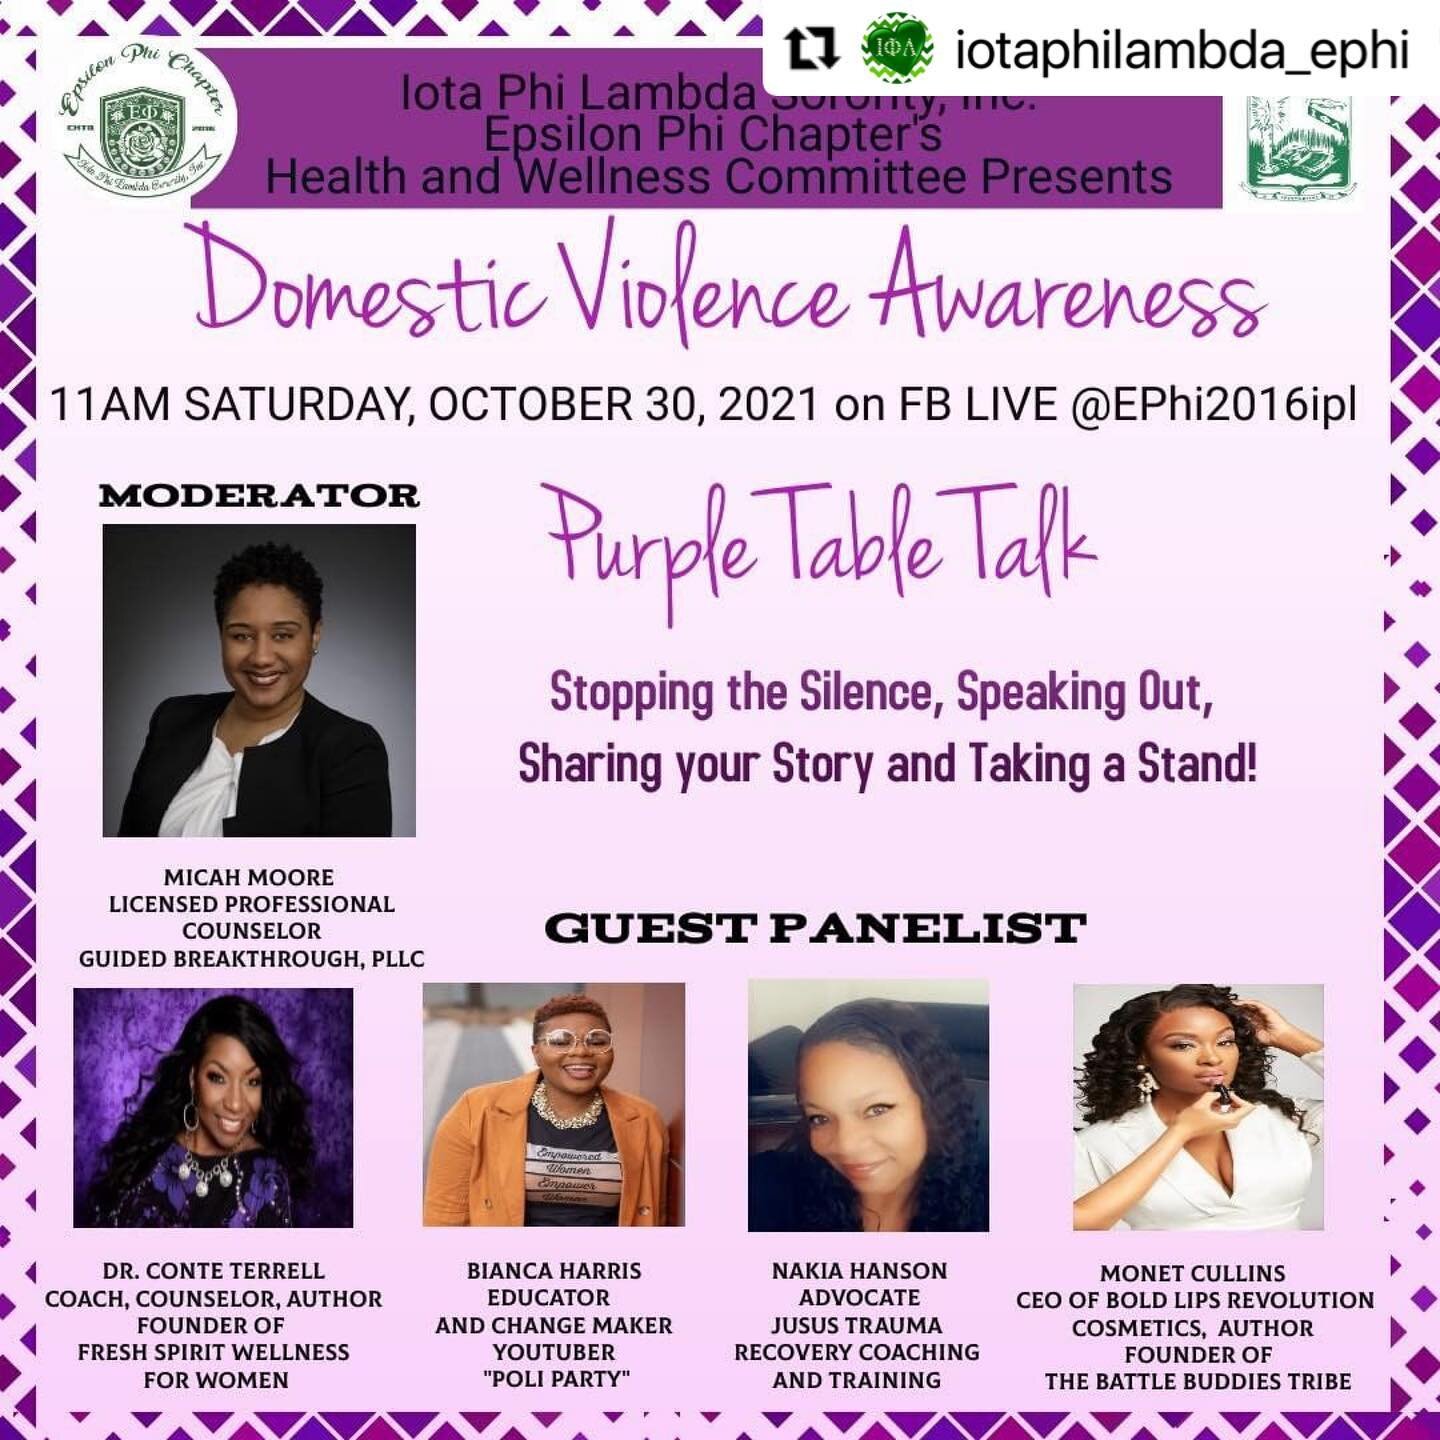 #Repost @iotaphilambda_ephi with @make_repost
・・・
Join the Epsilon Phi Chapter for our Domestic Violence Awareness Month &ldquo;Purple Table Talk&rdquo; on Stopping the Silence, Speaking Out, Sharing your Story and Taking a Stand! 

IG Family, EPhi I